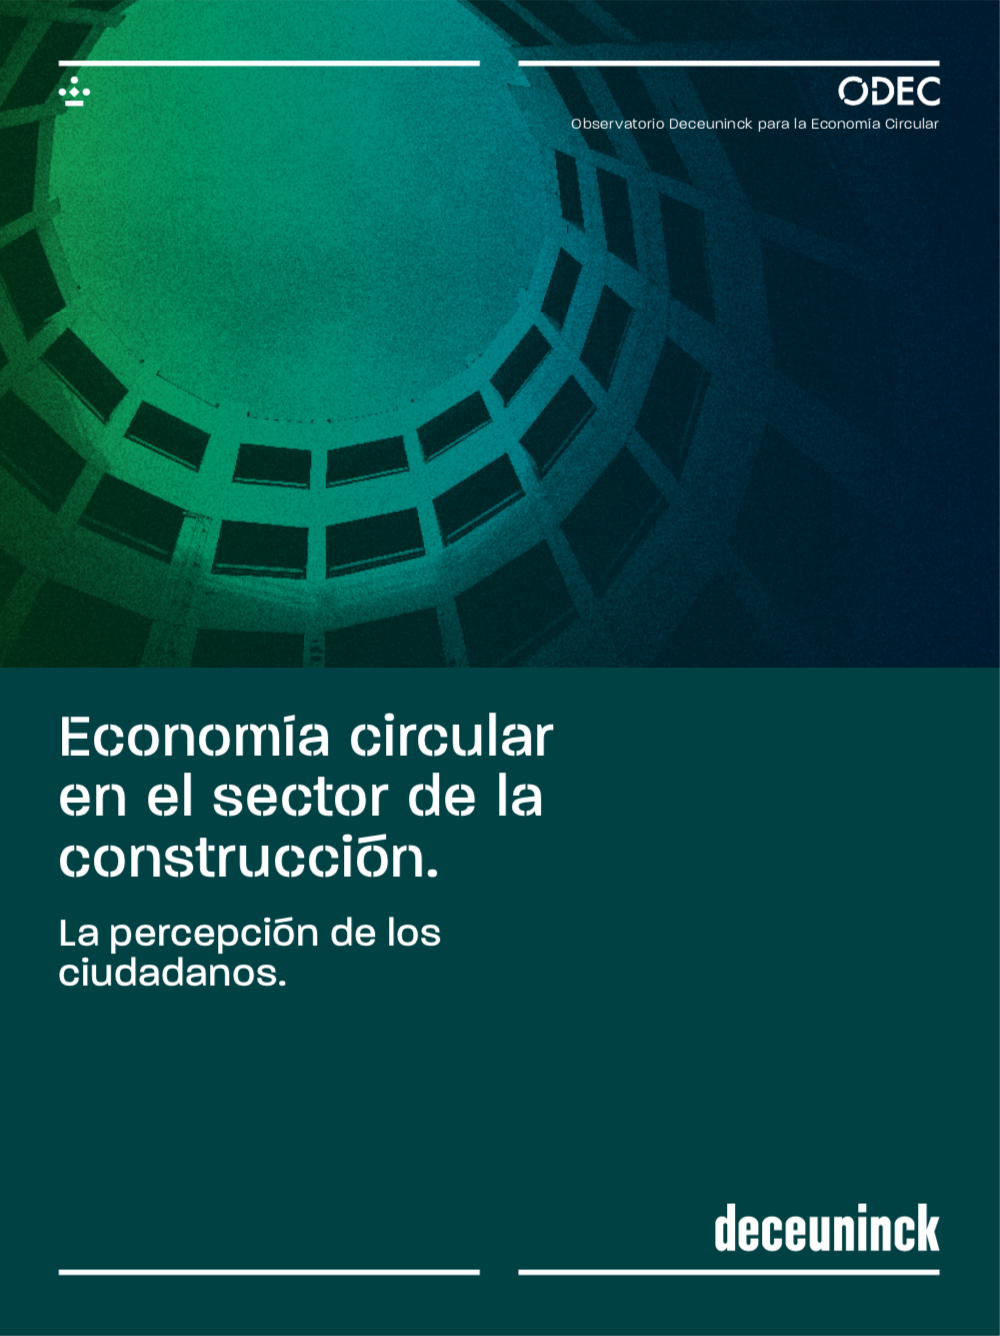 Report: Circular Economy In The Construction Sector - NYX Awards Winner 